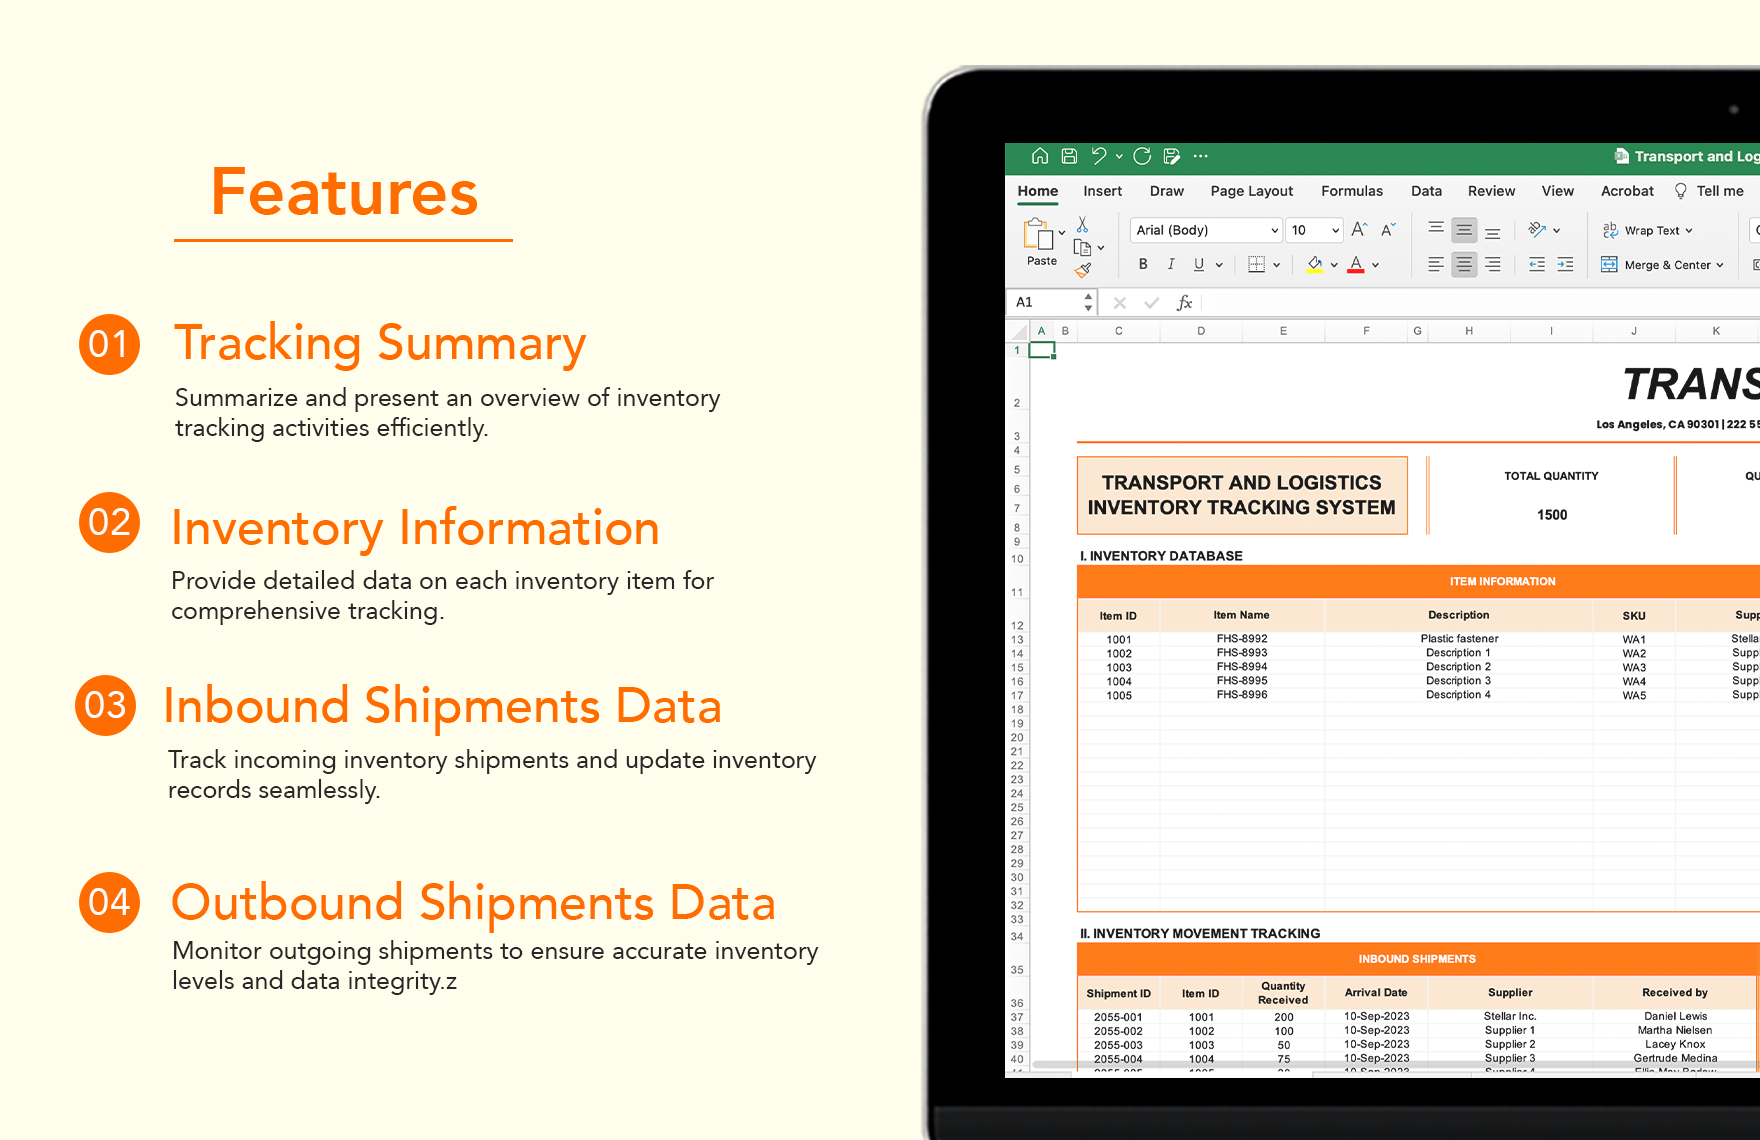 Transport and Logistics Inventory Tracking System Template